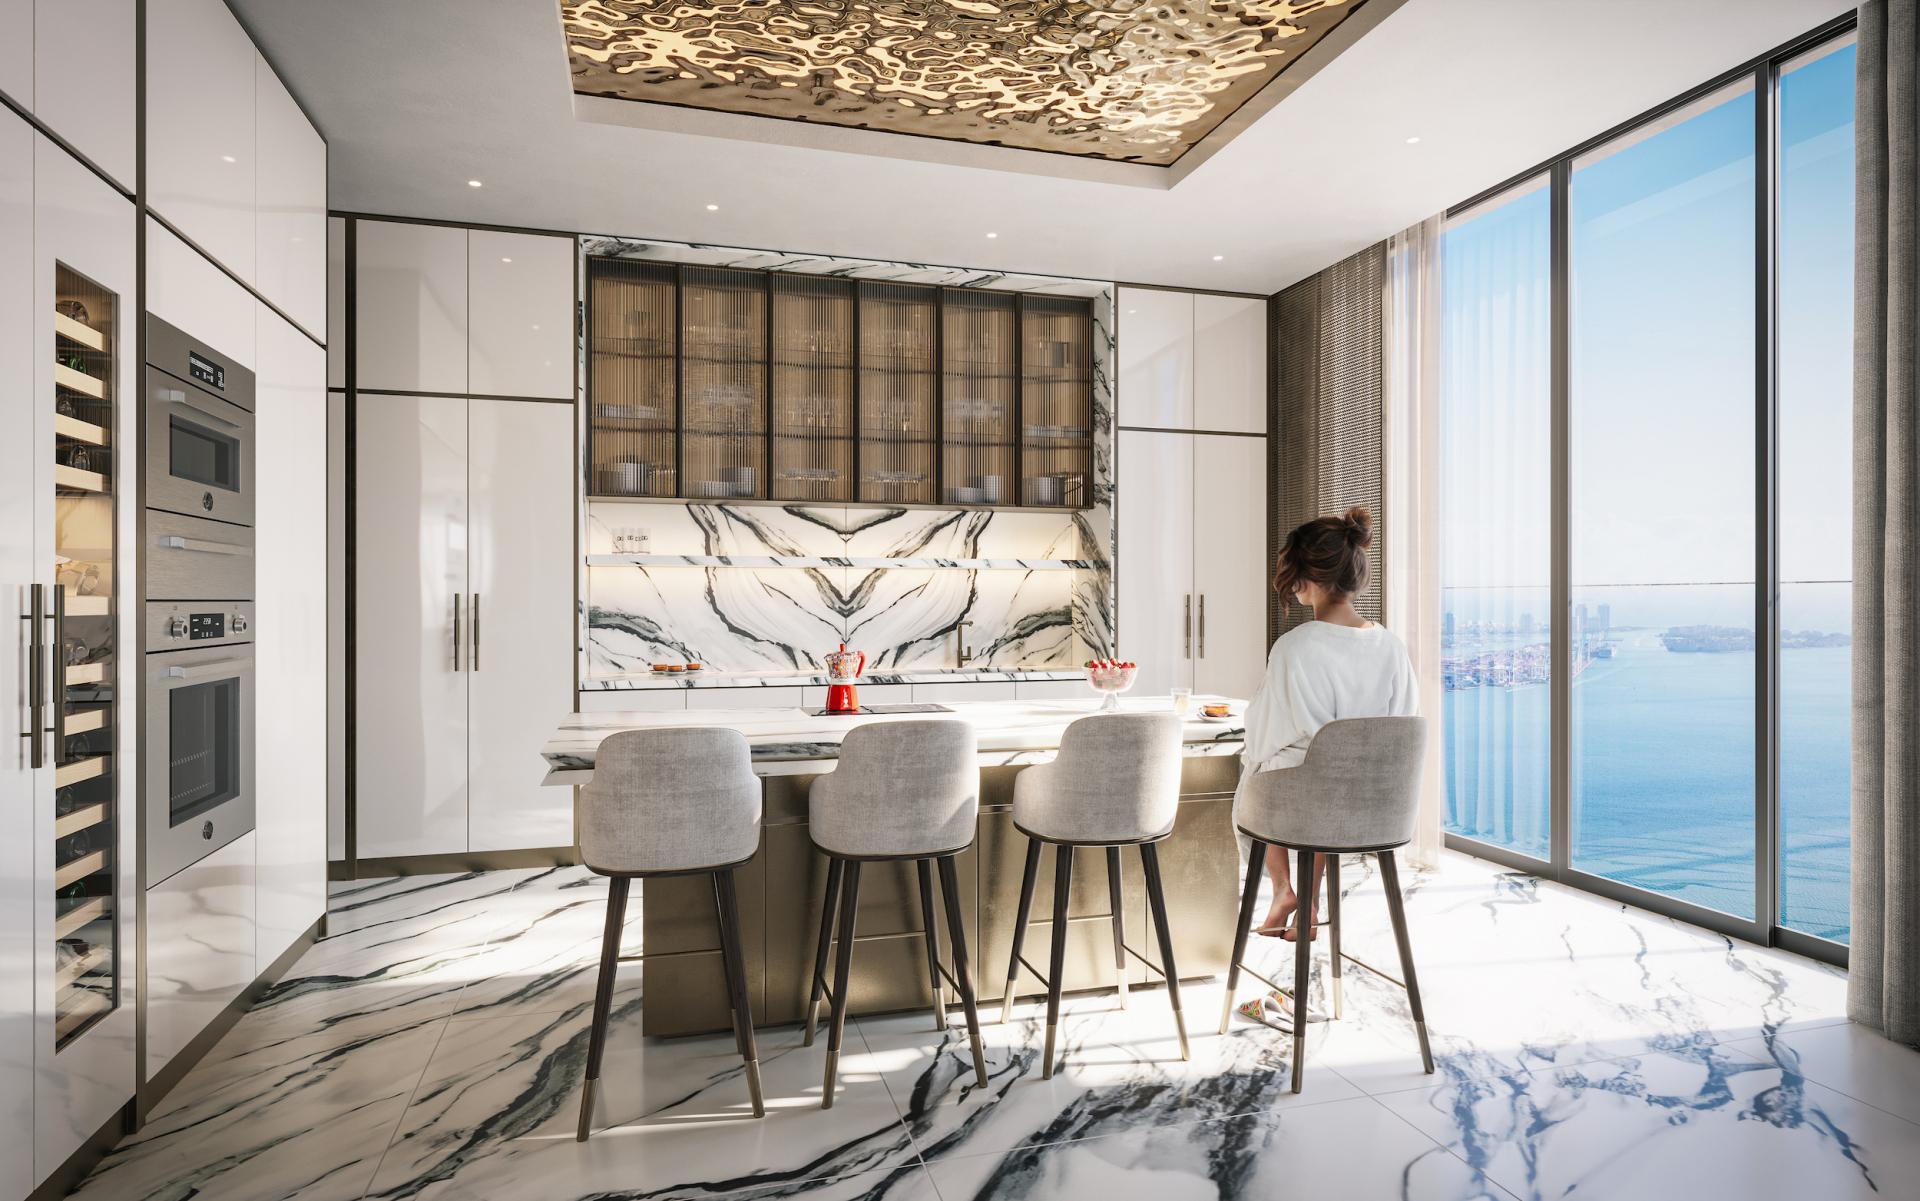  Dolce & Gabbana launches first global residences and hotel at 888 Brickell in Miami